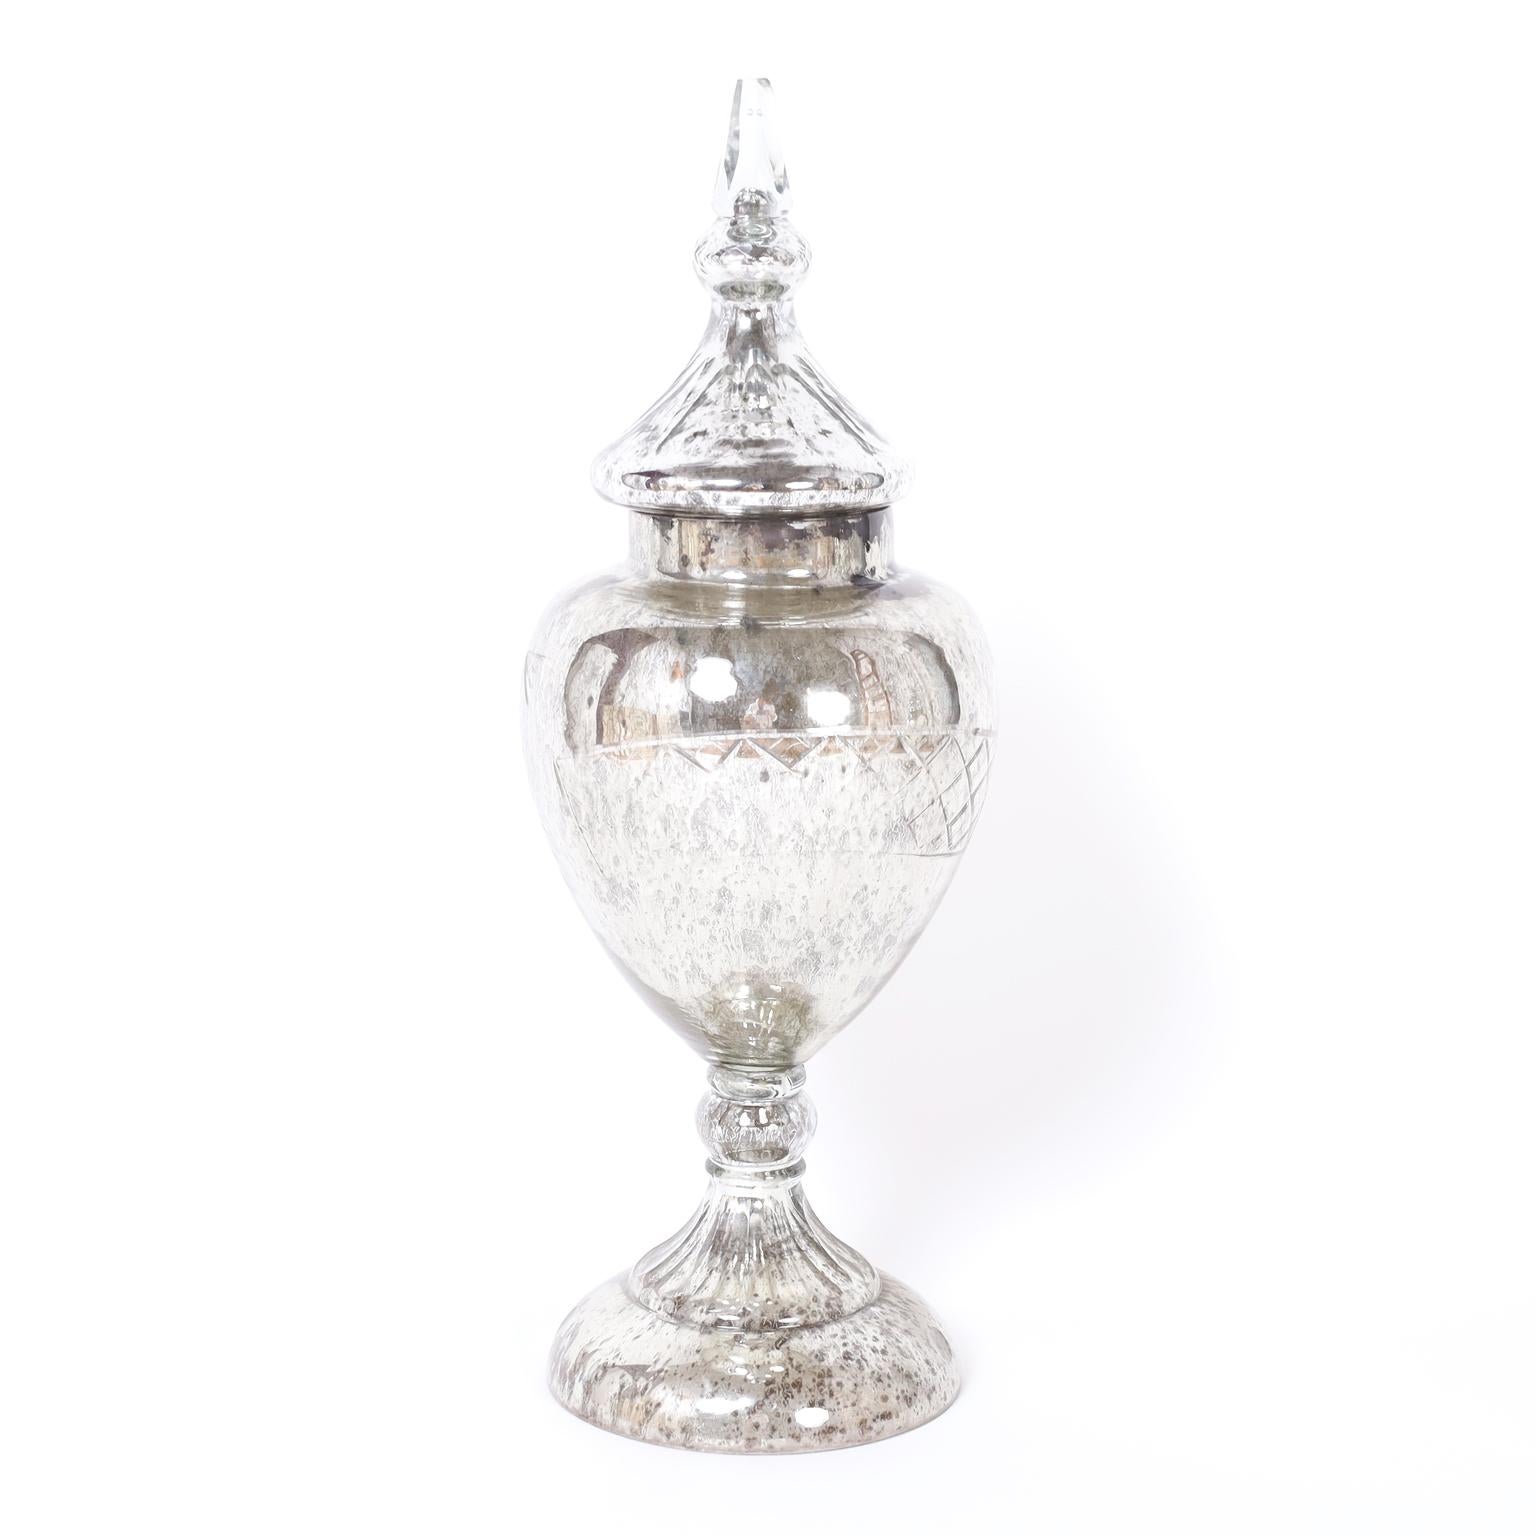 Pair of Victorian hand blown mercury glass lidded containers with classical form featuring cut geometric designs and an alluring time worn distressed finish.